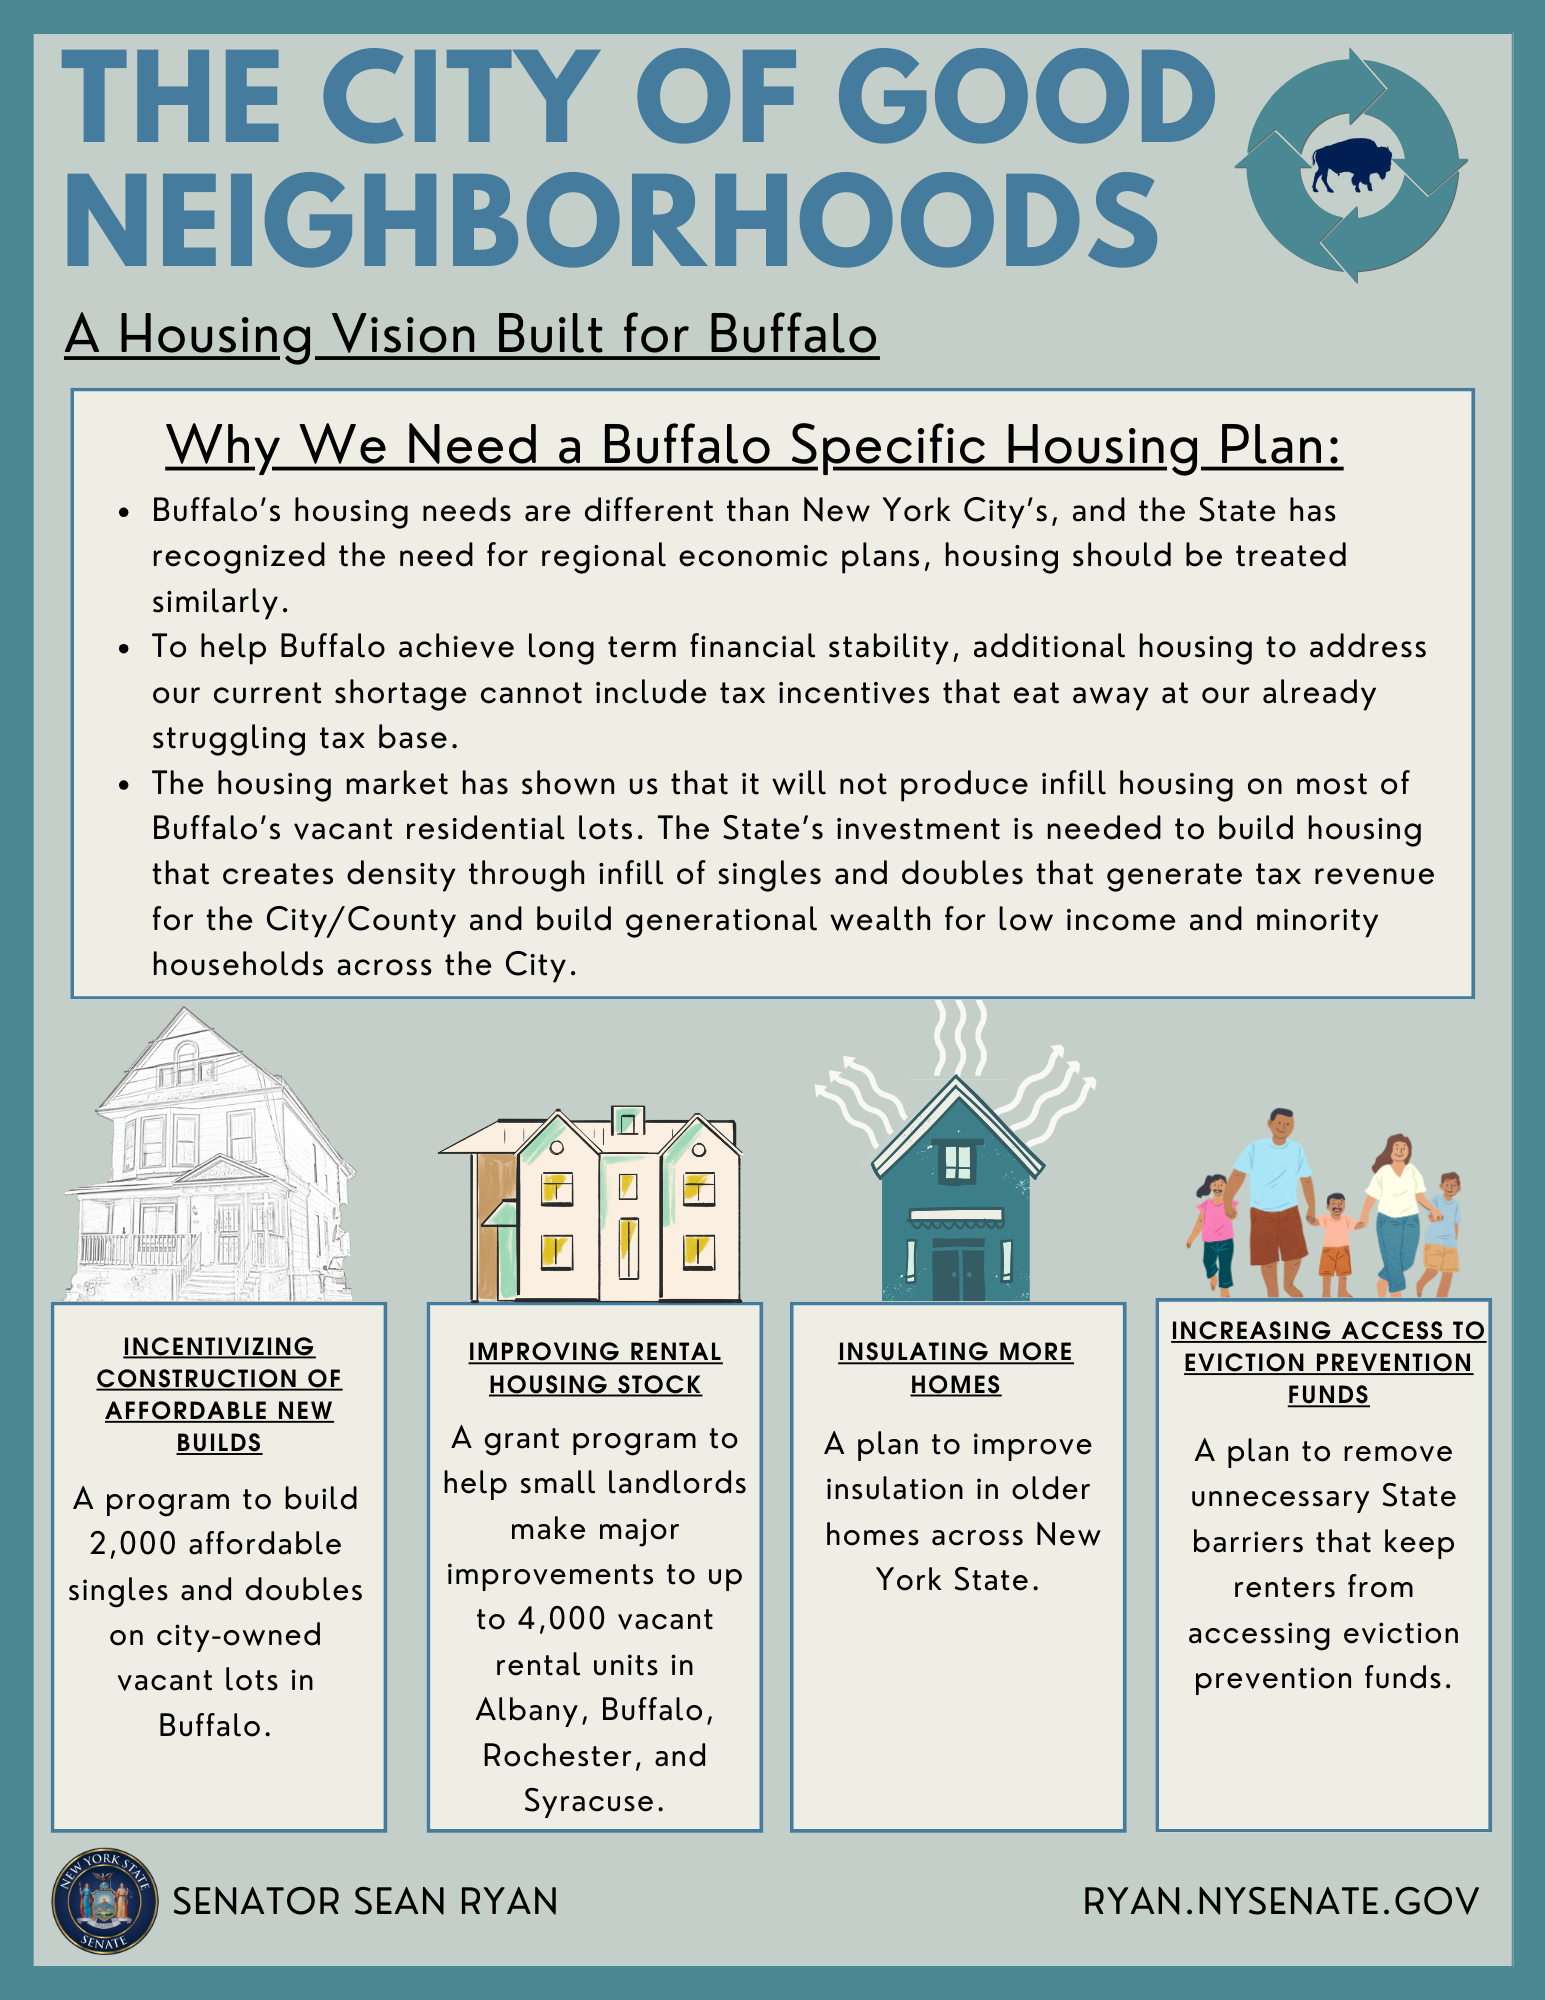 The City of Good Neighborhoods A Housing Vision Built for Buffalo Why We Need a Buffalo Specific Housing Plan: ● Buffalo’s housing needs are different than New York City’s, and the State has recognized the need for regional economic plans, housing should be treated similarly. ● To help Buffalo achieve long term financial stability, additional housing to address our current shortage cannot include tax incentives that eat away at our already struggling tax base. ● The housing market has shown us that it will not produce infill housing on most of Buffalo’s vacant residential lots. The State’s investment is needed to build housing that creates density through infill of singles and doubles that generate tax revenue for the City/County and build generational wealth for low income and minority households across the City.  Incentivizing Construction of Affordable New Builds A program to build 2,000 affordable singles and doubles on city-owned vacant lots in Buffalo. Improving Rental Housing Stock A grant program to help small landlords make major improvements to up to 4,000 vacant rental units in Albany, Buffalo, Rochester, and Syracuse. Insulating More Homes A plan to improve insulation in older homes across New York State. Increasing Access To Eviction Prevention Funds A plan to remove unnecessary State barriers that keep renters from accessing eviction prevention funds.